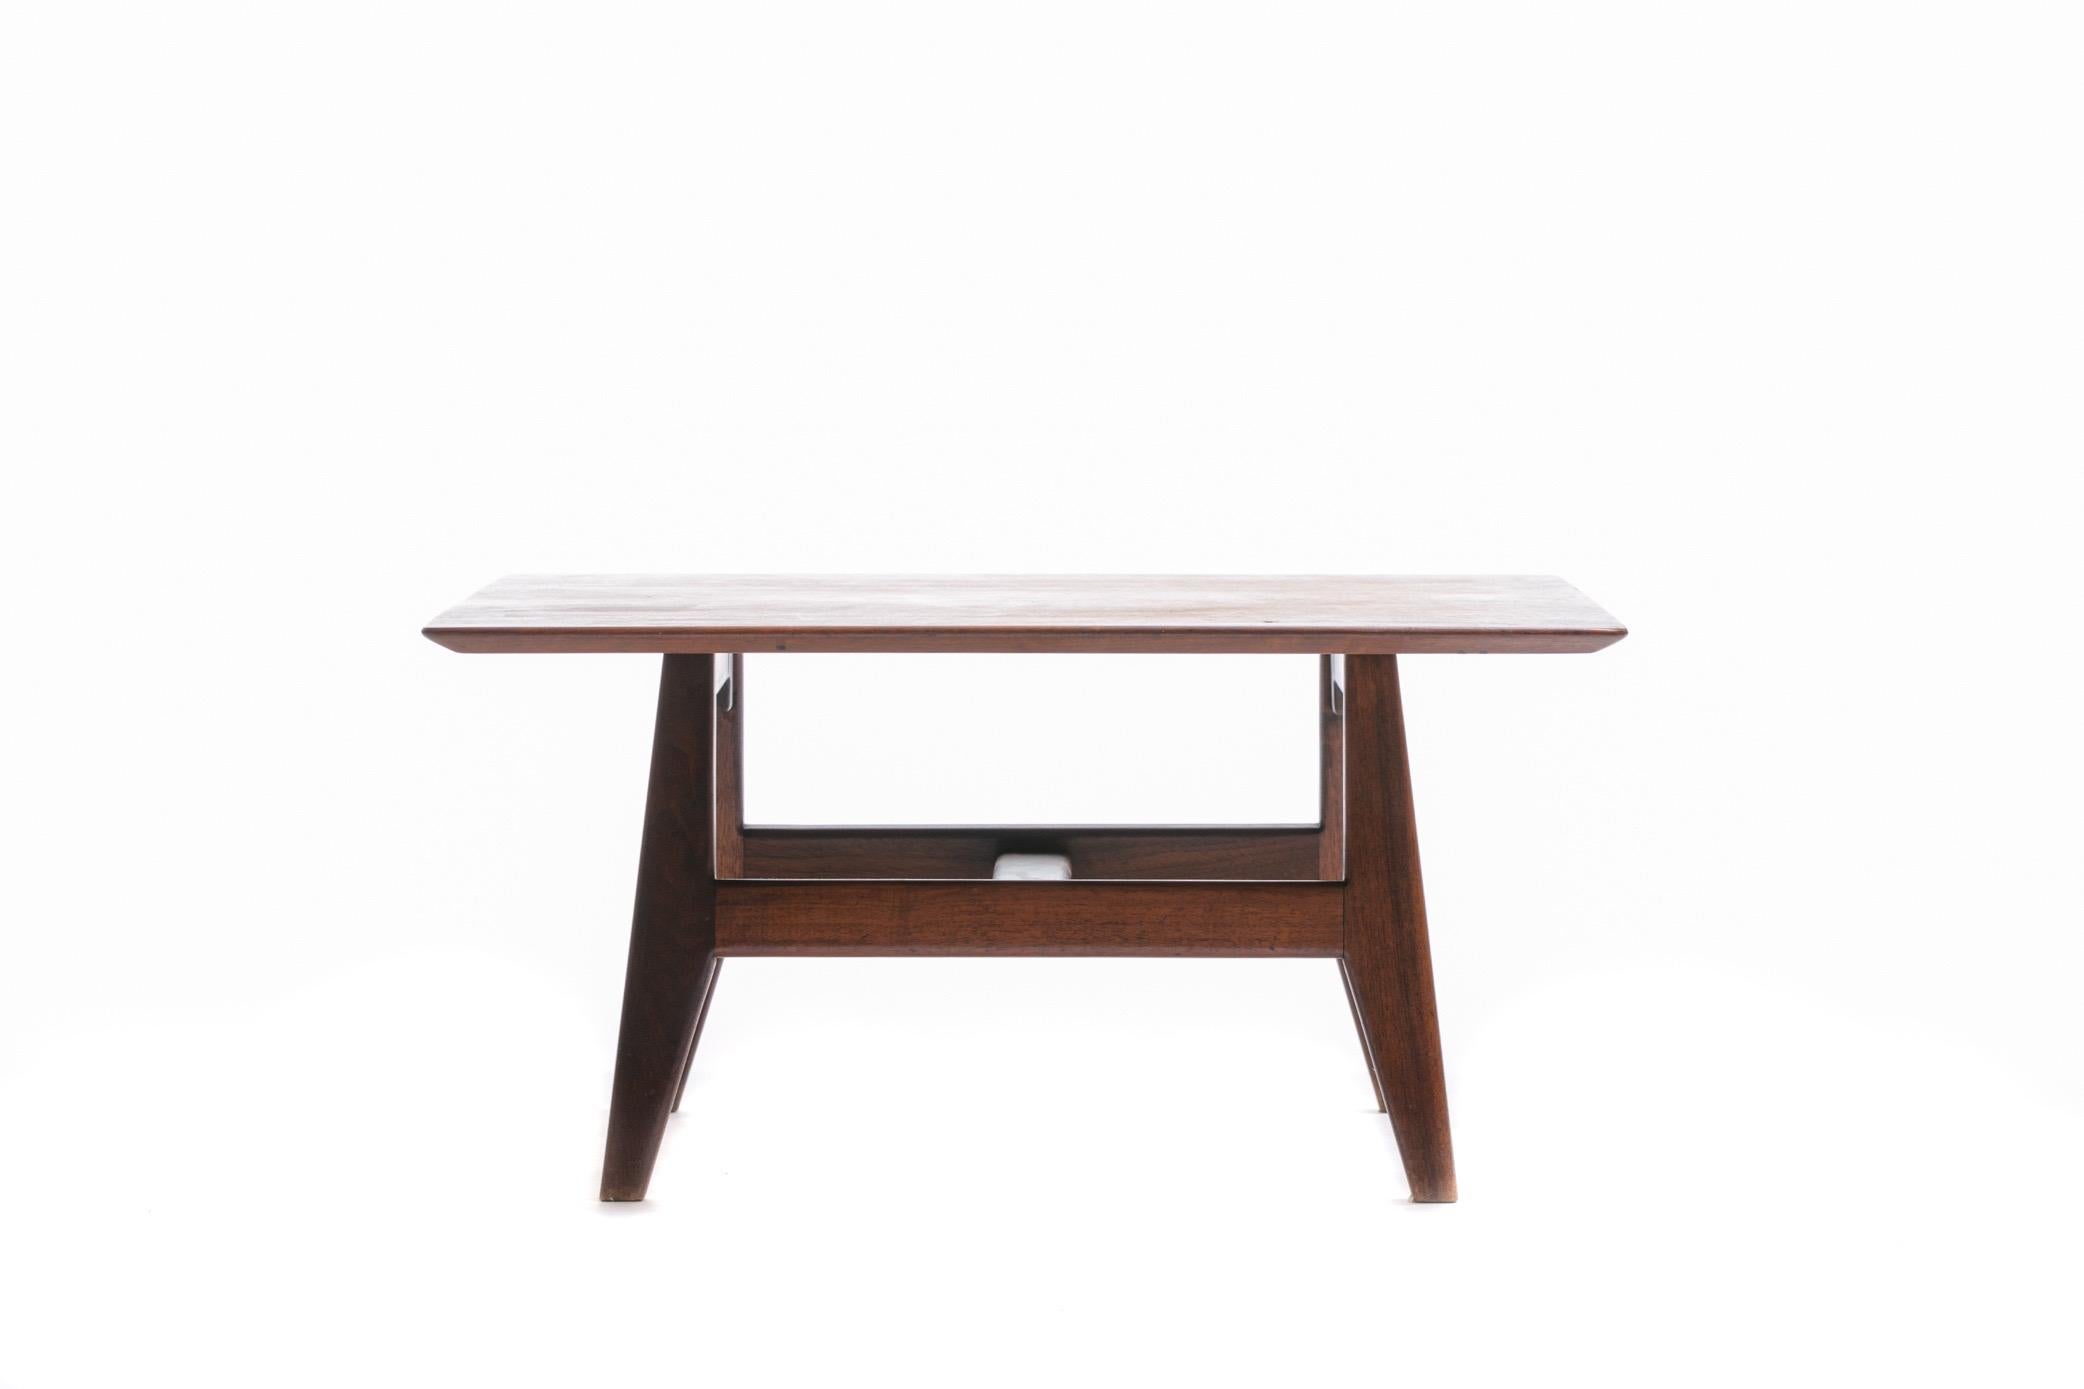 Early Jens Risom Low Profile Walnut Coffee Table, circa 1948 For Sale 1